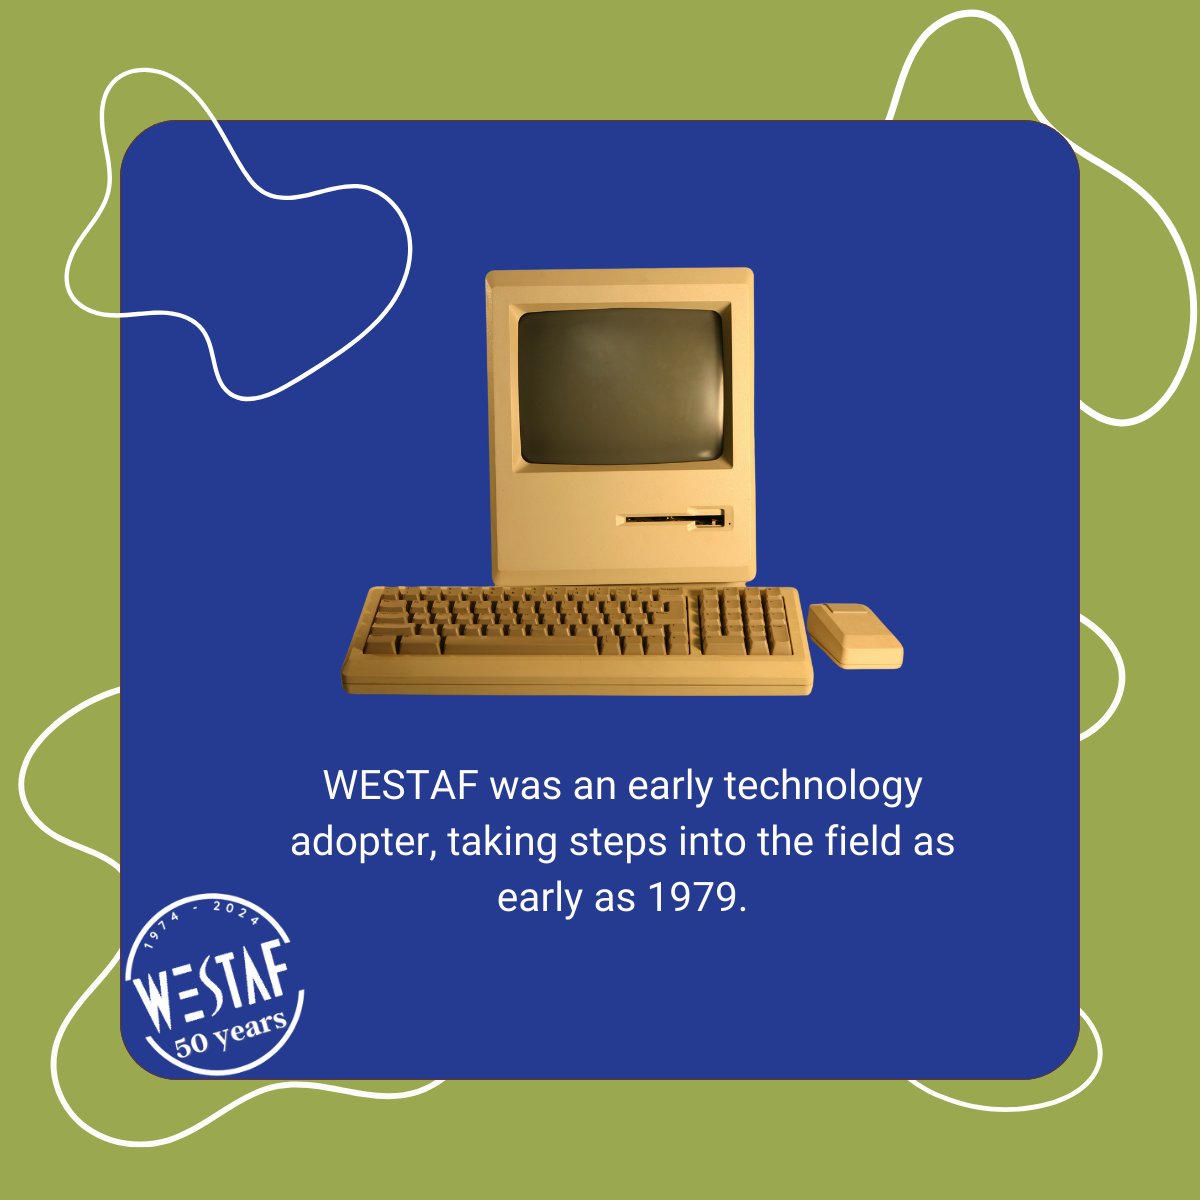 WESTAF began using computer technology as early as 1979 to implement the NEA’s National Information Standards Project in its member states, expanding it into a regional grants management system. #MyWESTAFStory #WESTAF50 #Technology